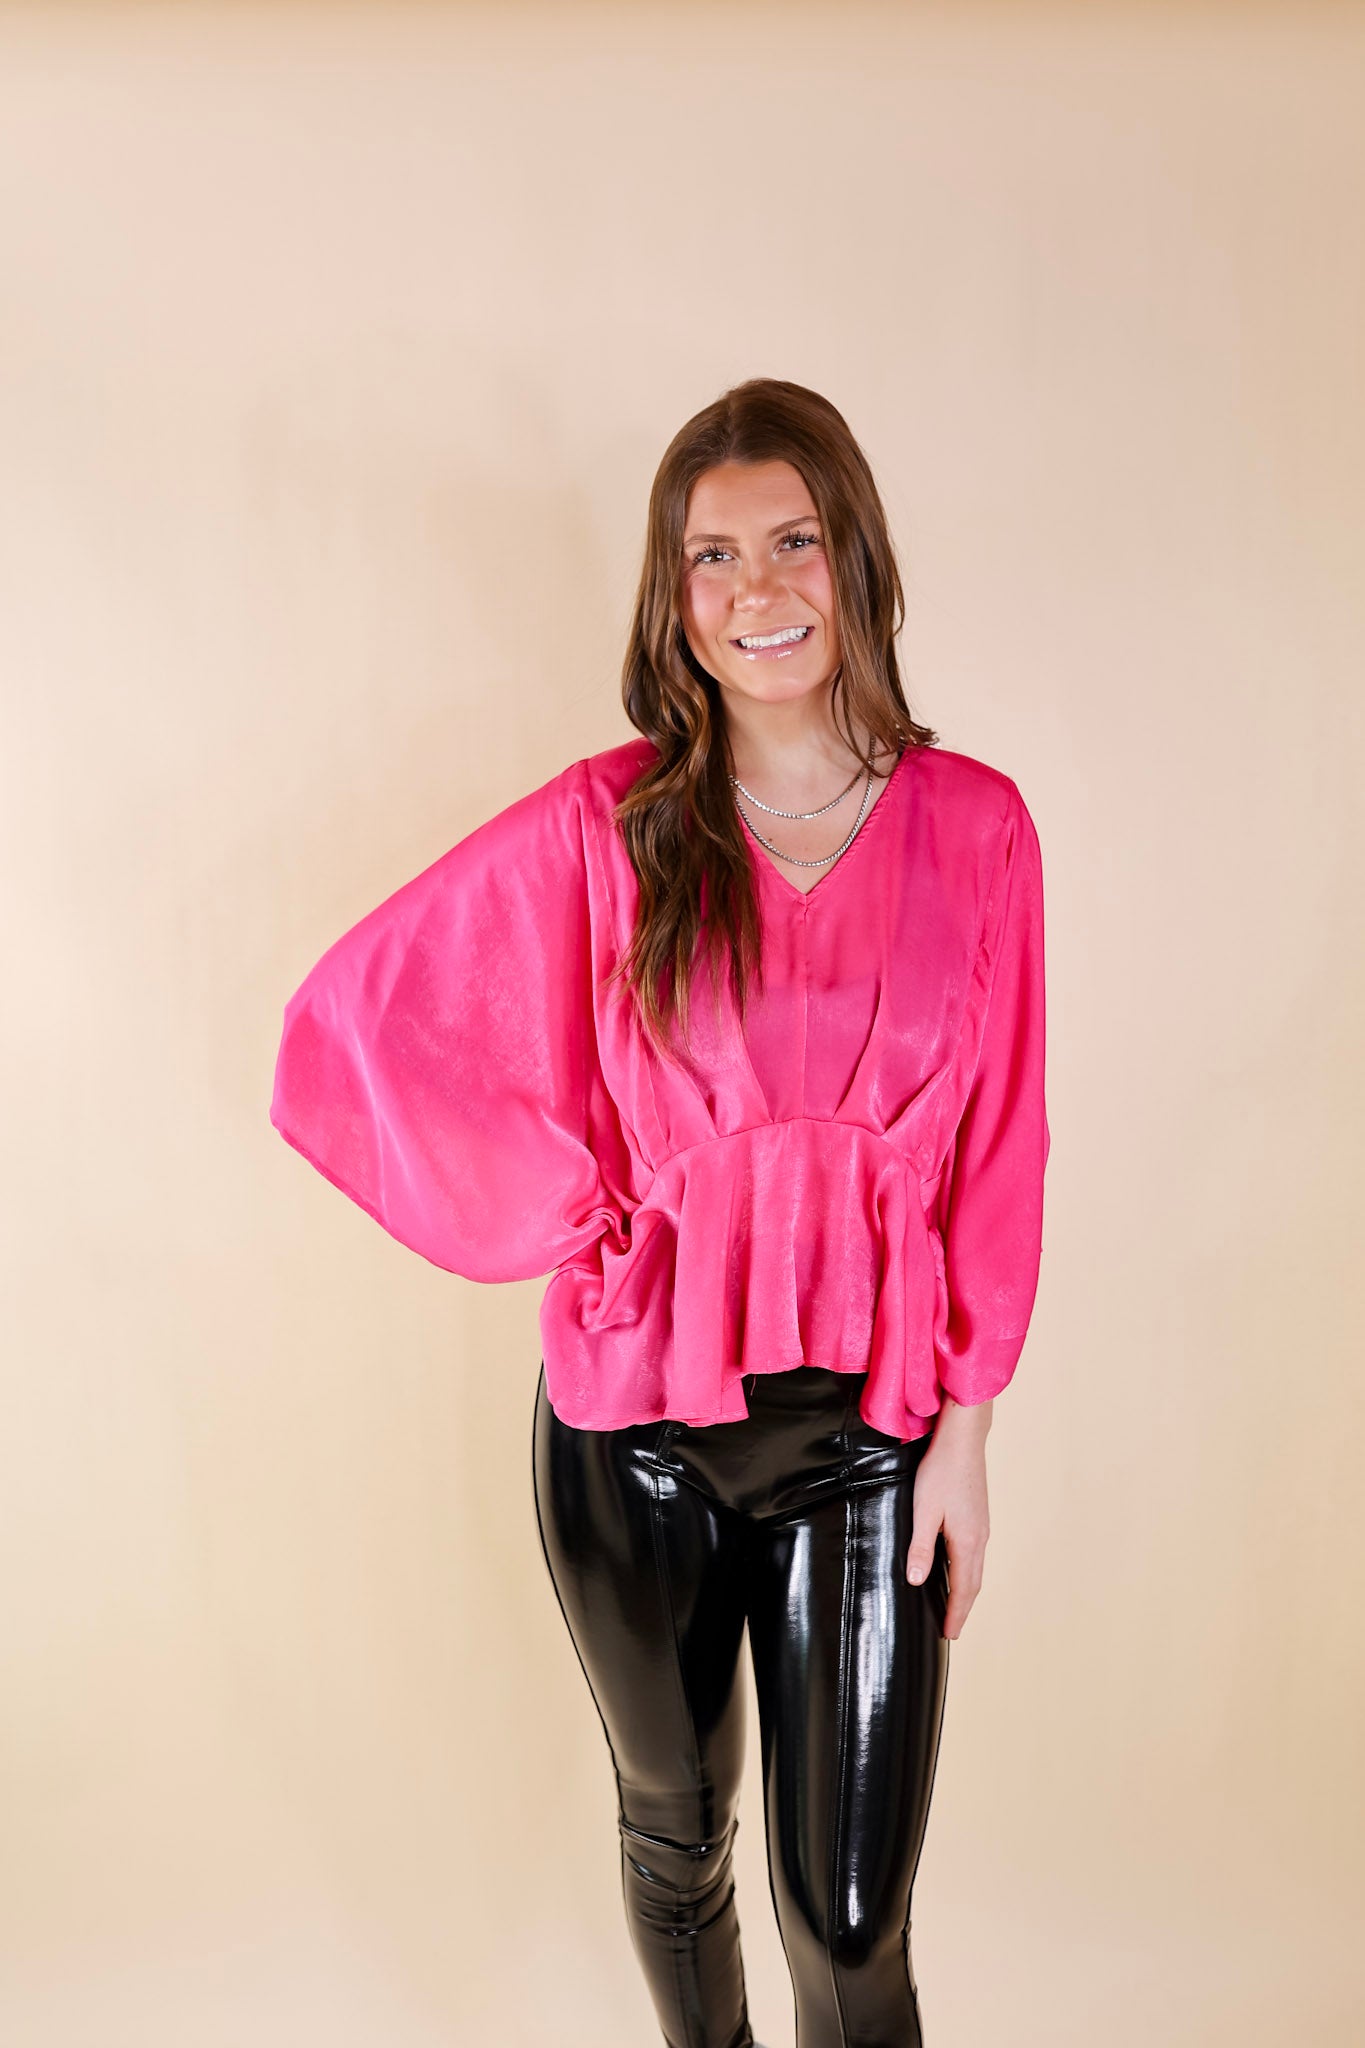 Hear the Music Drop Sleeve Satin V Neck Peplum Top in Hot Pink - Giddy Up Glamour Boutique